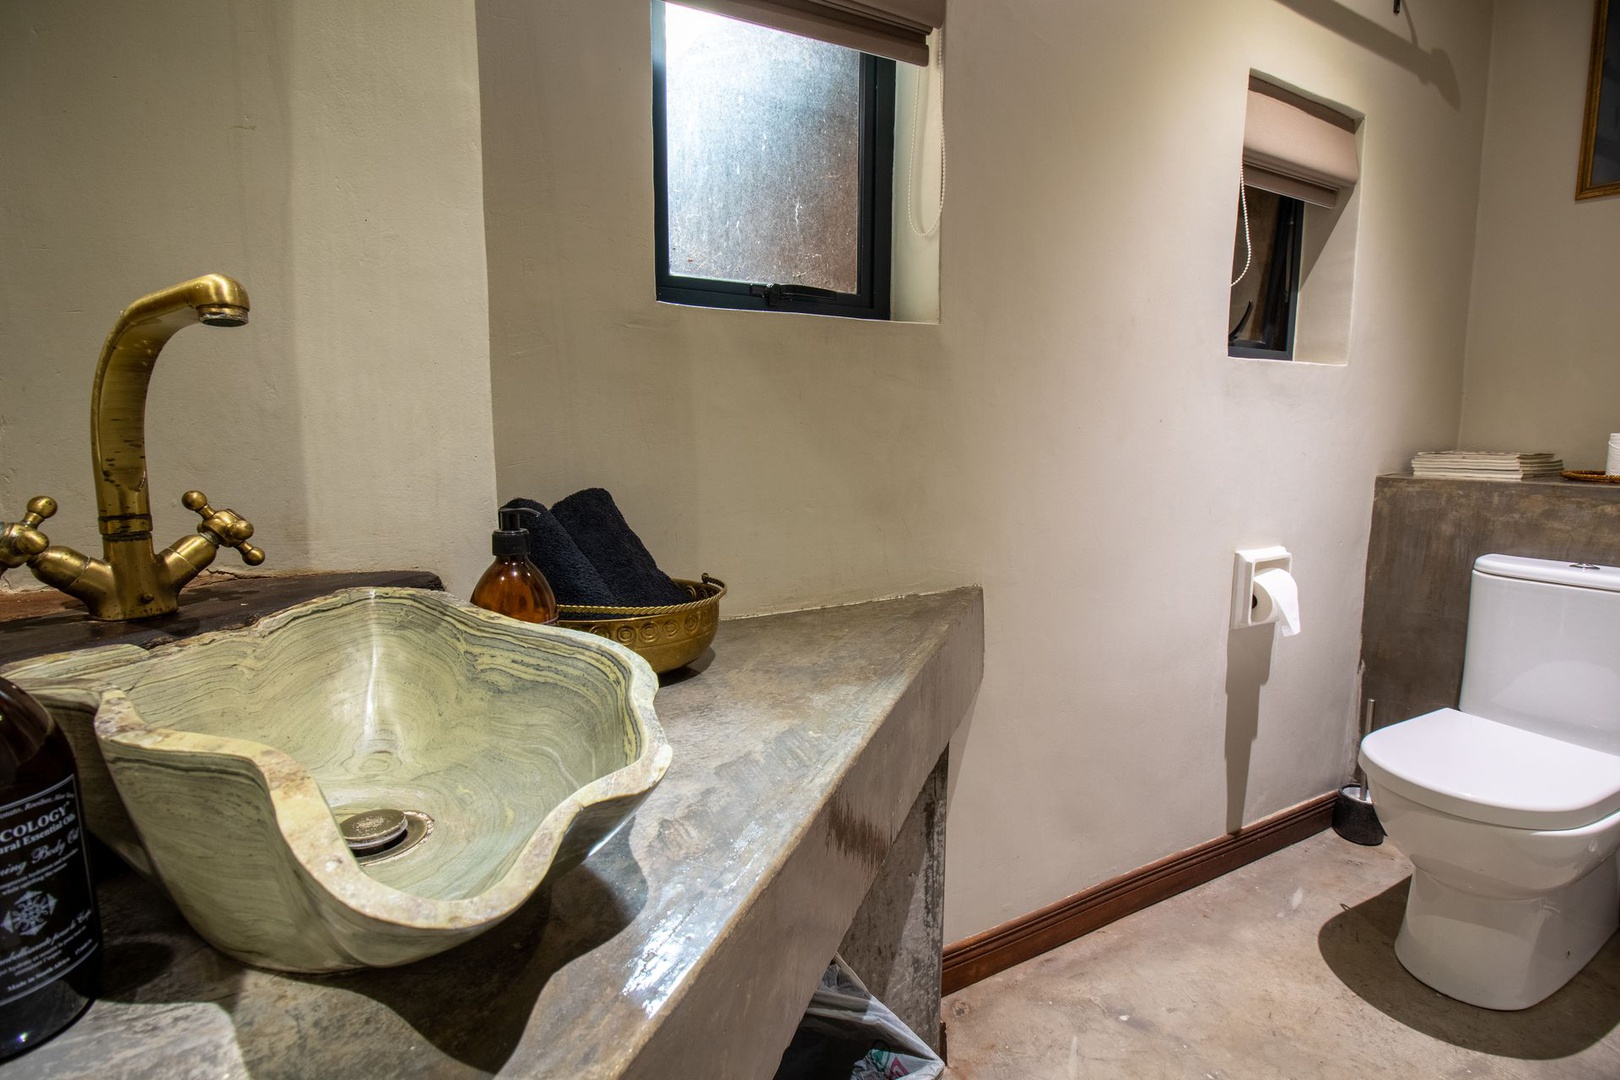 House in Kosmos - Guest toilet close to lounge showing exquisite natural stoneware